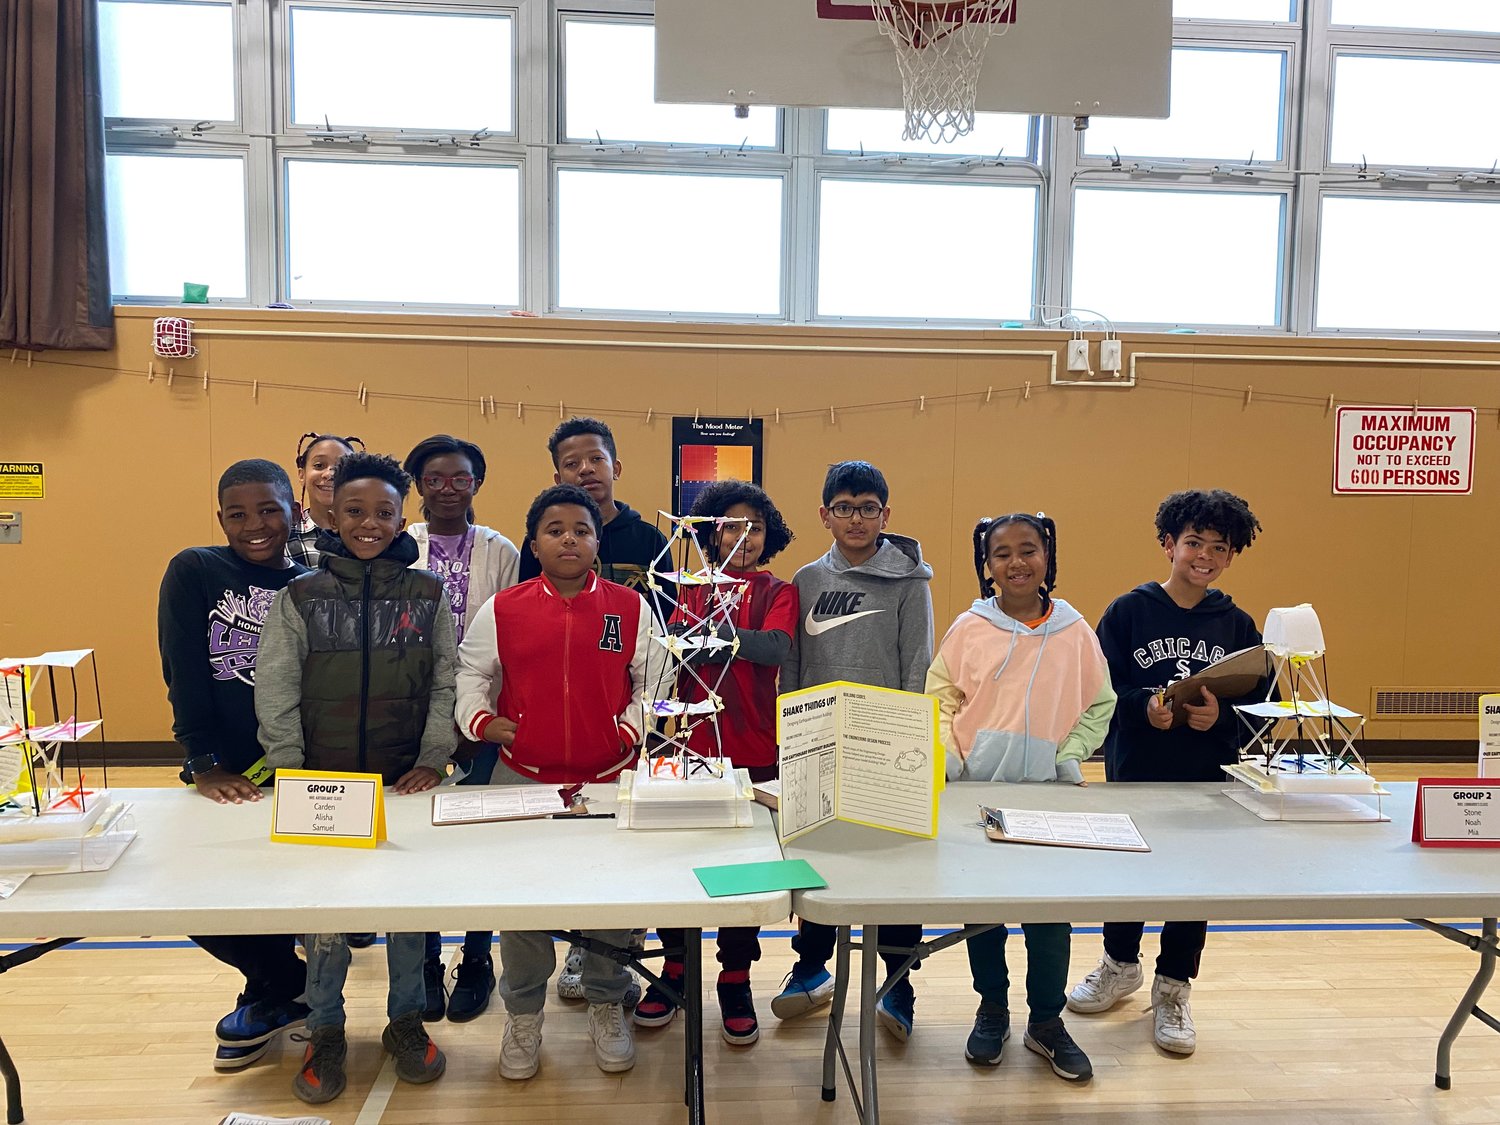 Fifth graders at Lenox Elementary School displayed their earthquake proof building creations, after learning about how to solve problems through engineering last month.